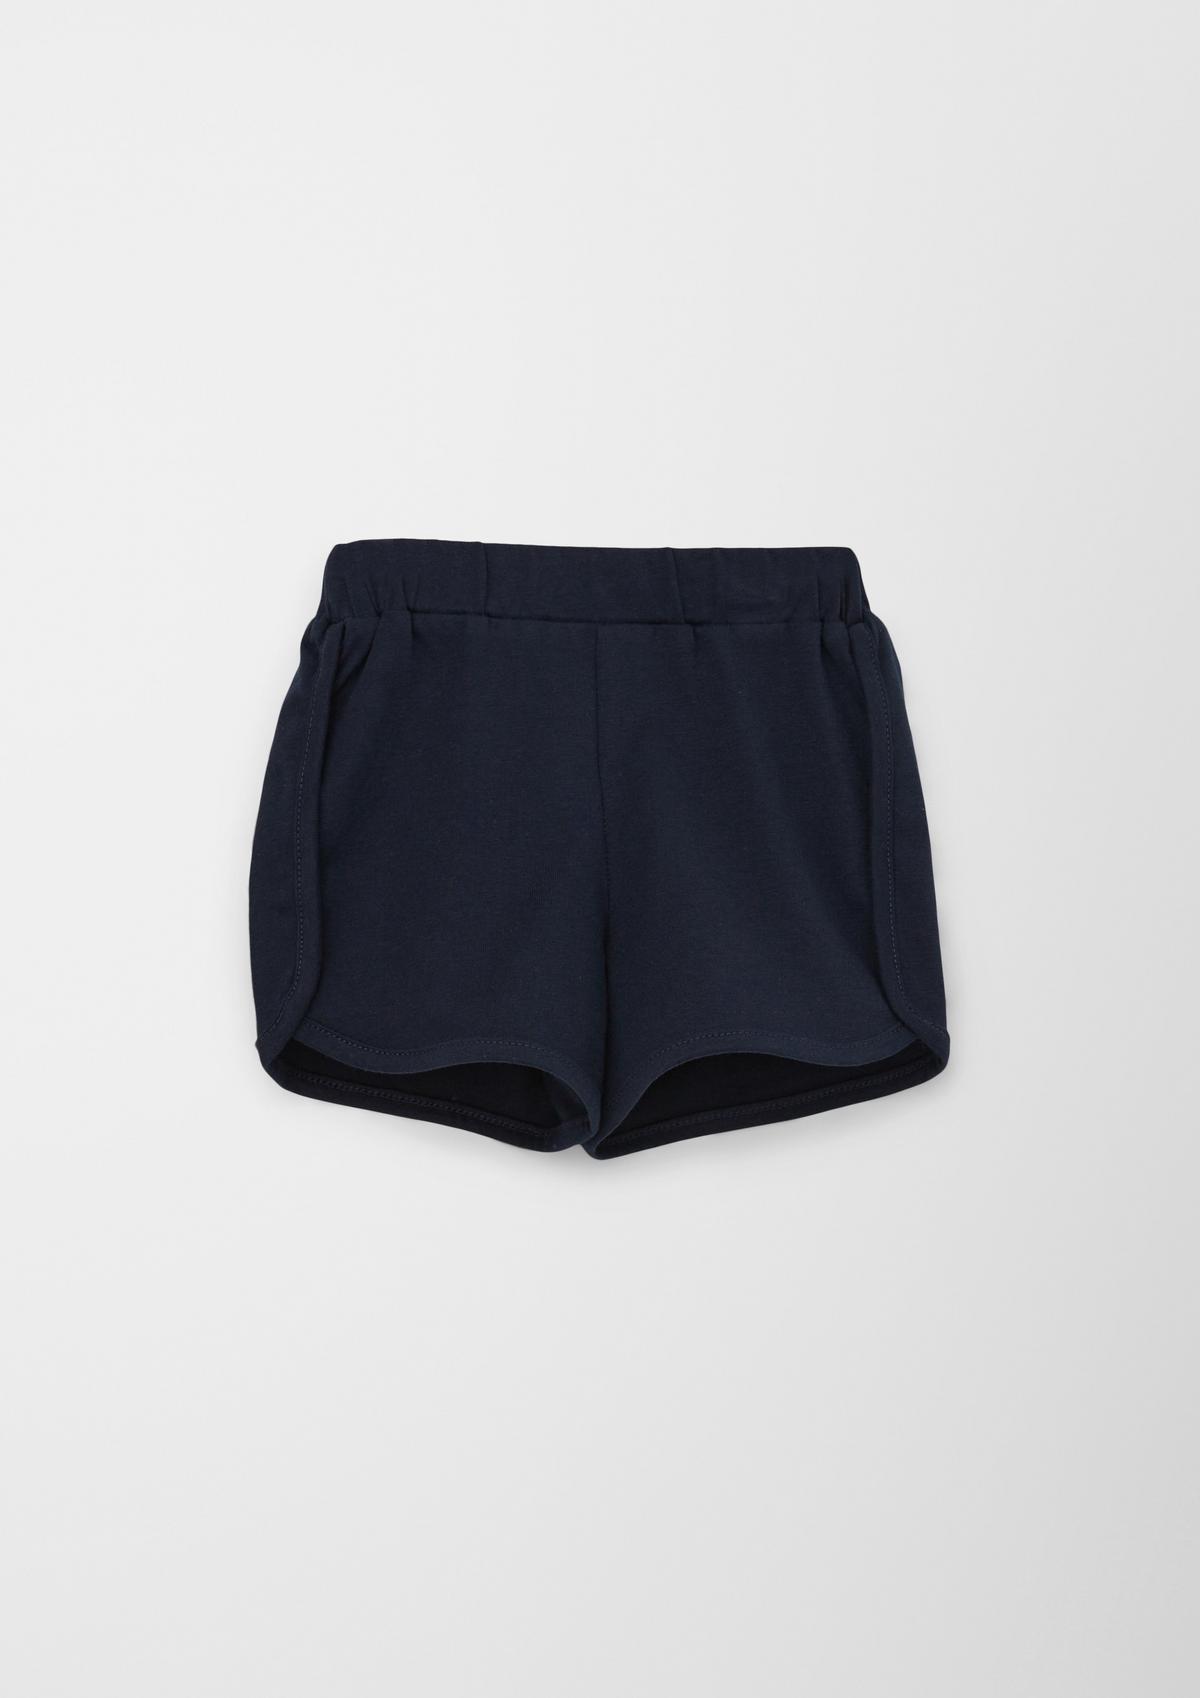 s.Oliver Shorts im sportiven Look